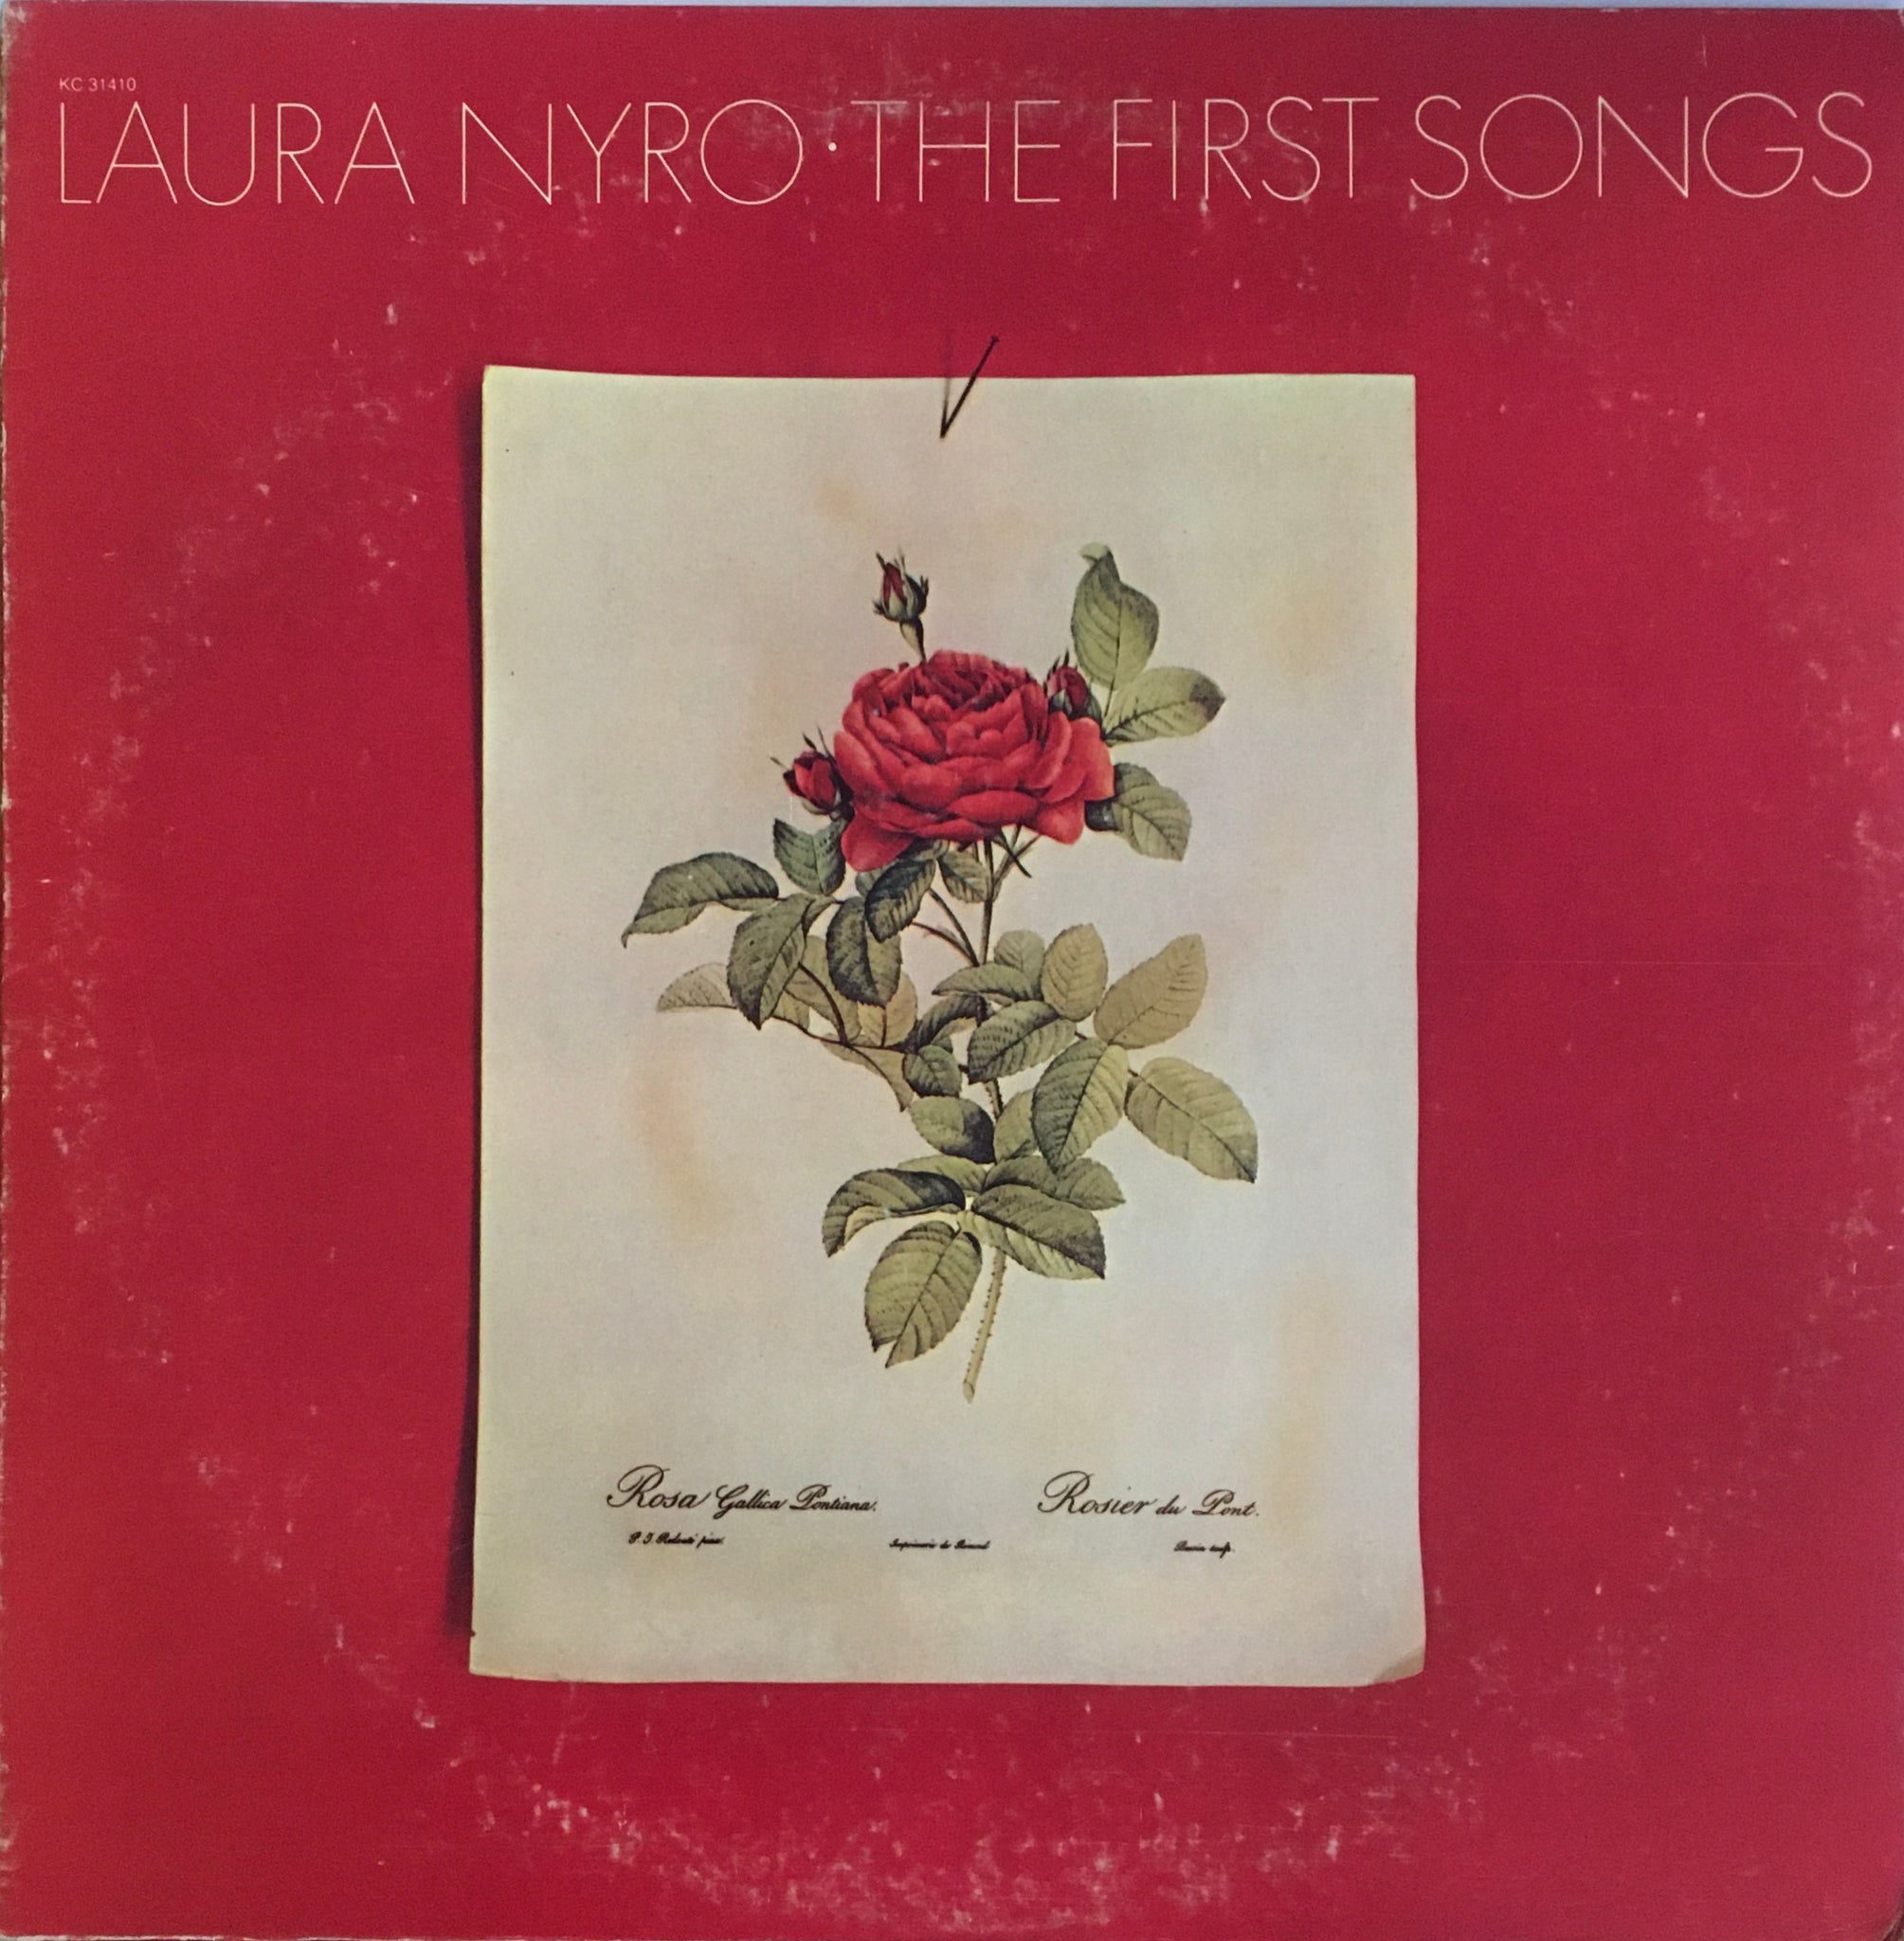 Laura Nyro "The First Songs" LP (1973)